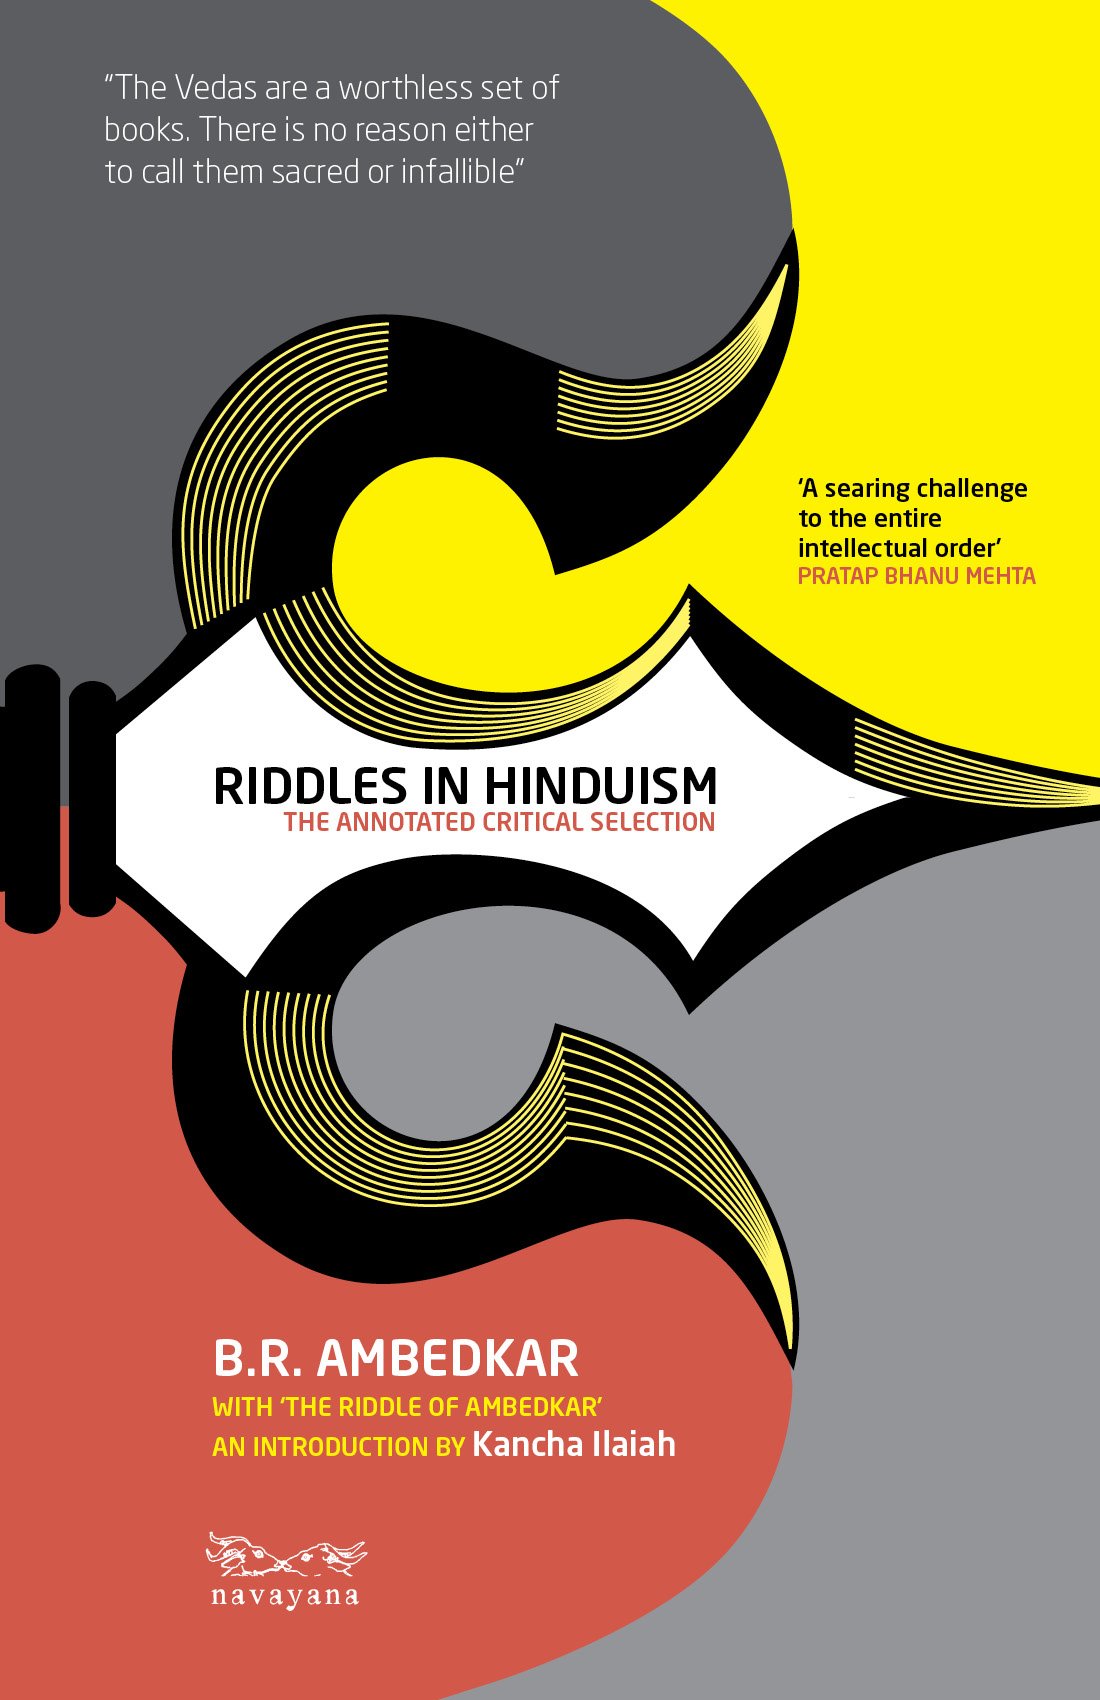 Riddles In Hinduism: The Annotated Critical Selection